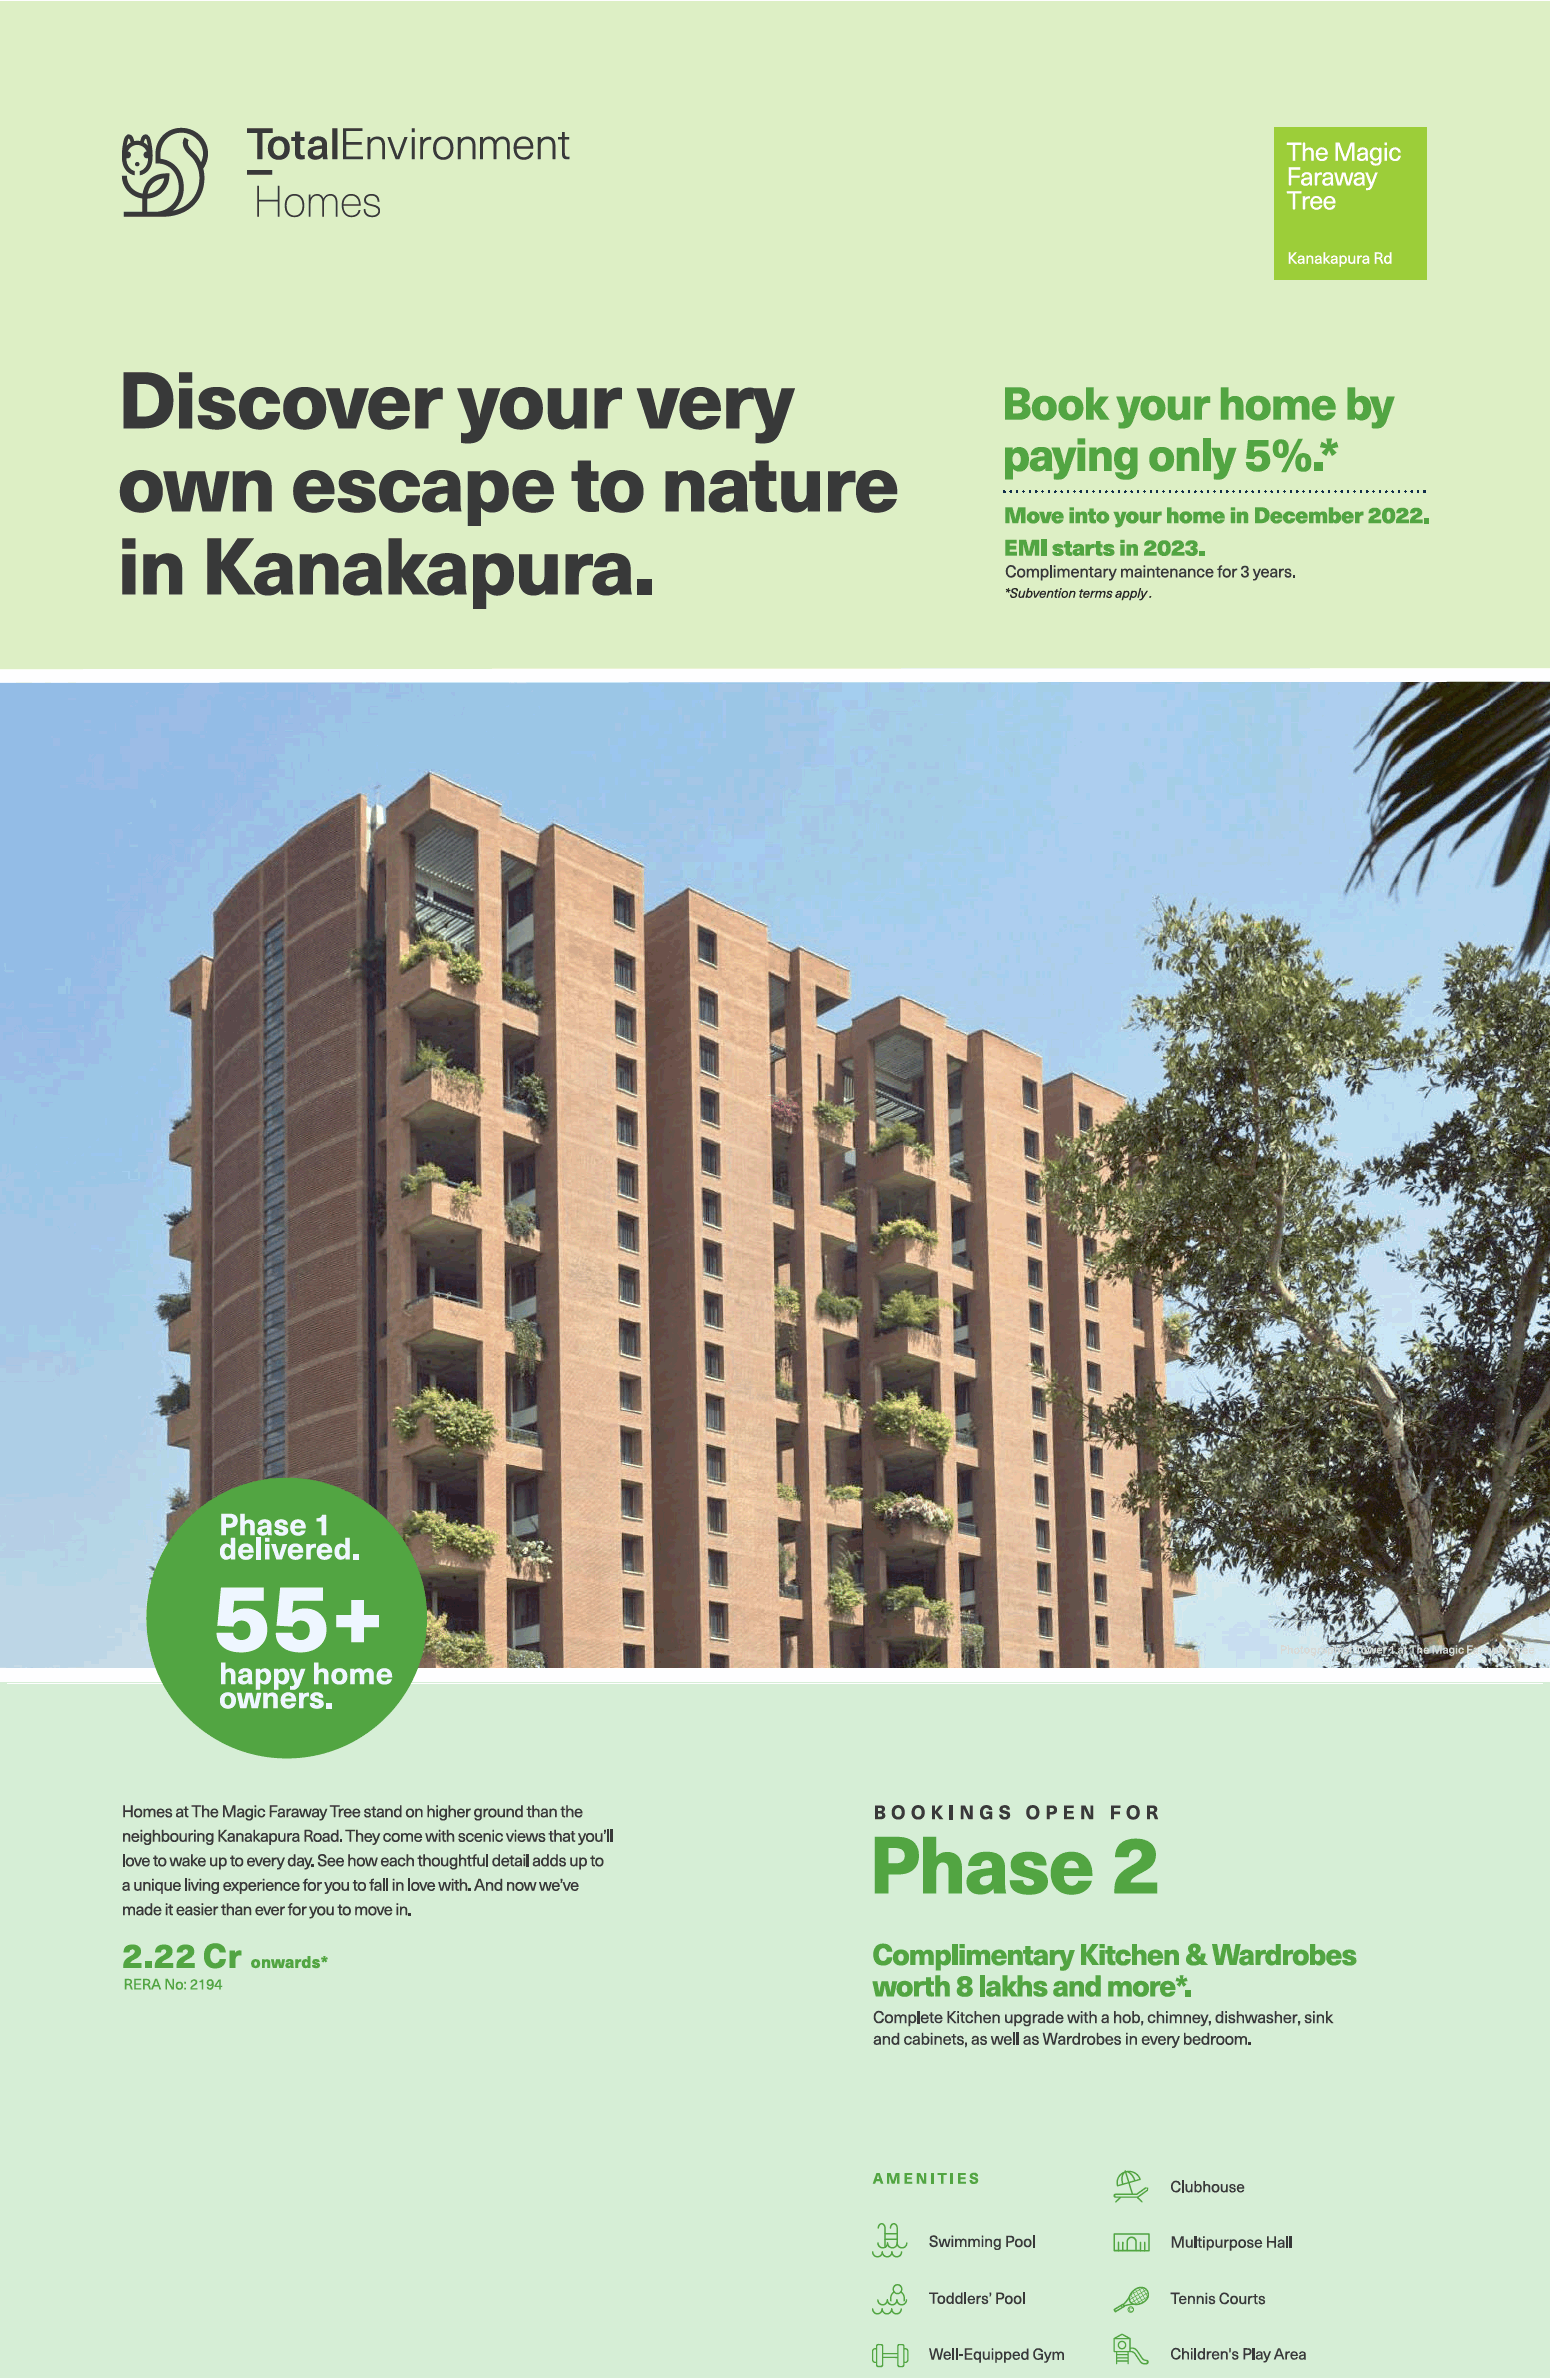 Book your home by paying only 5% at Total Environment The Magic Faraway Tree Phase in Bangalore Update